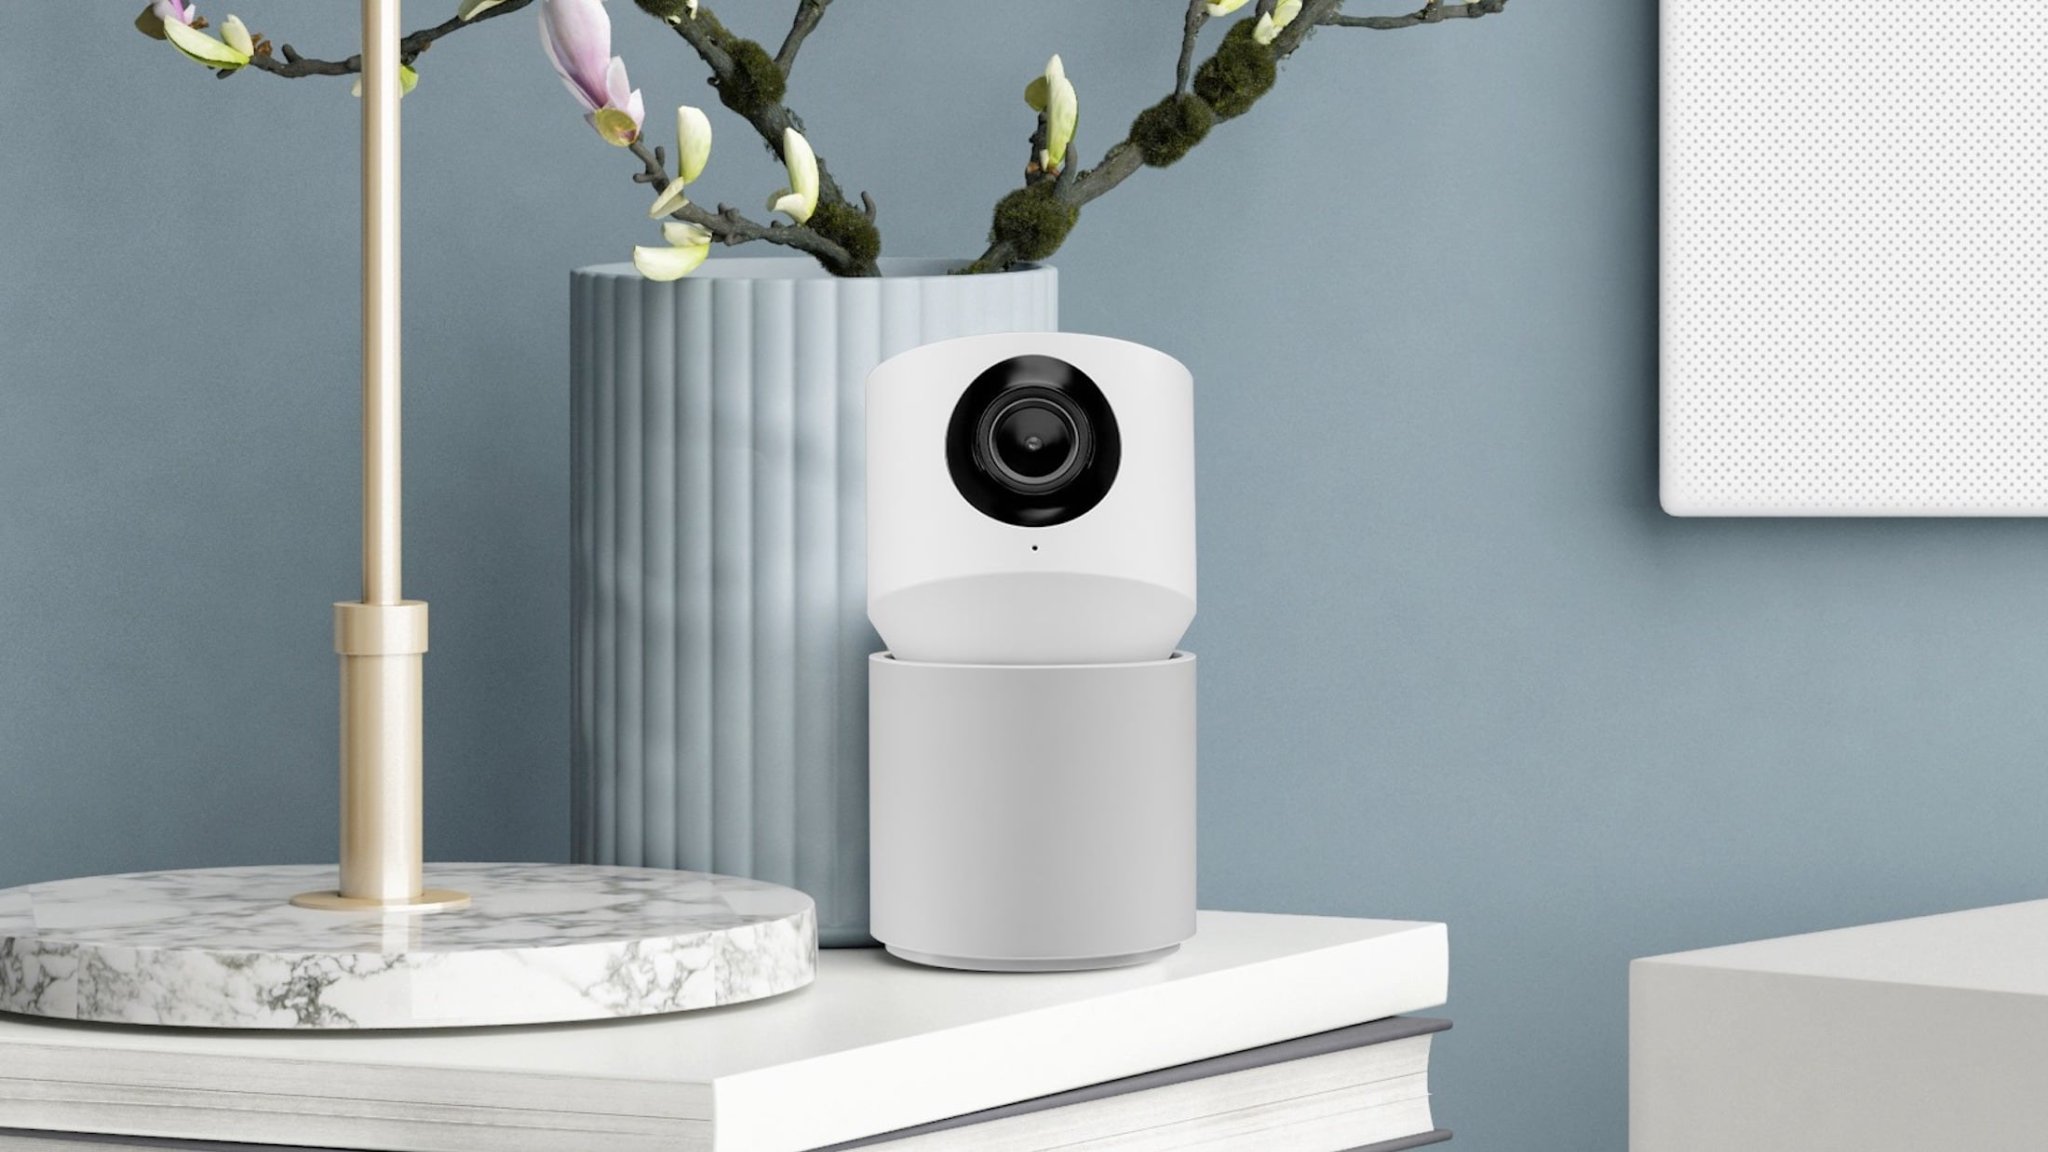 Hoop Cam+ Smart AI Indoor Camera uses advanced facial recognition technology